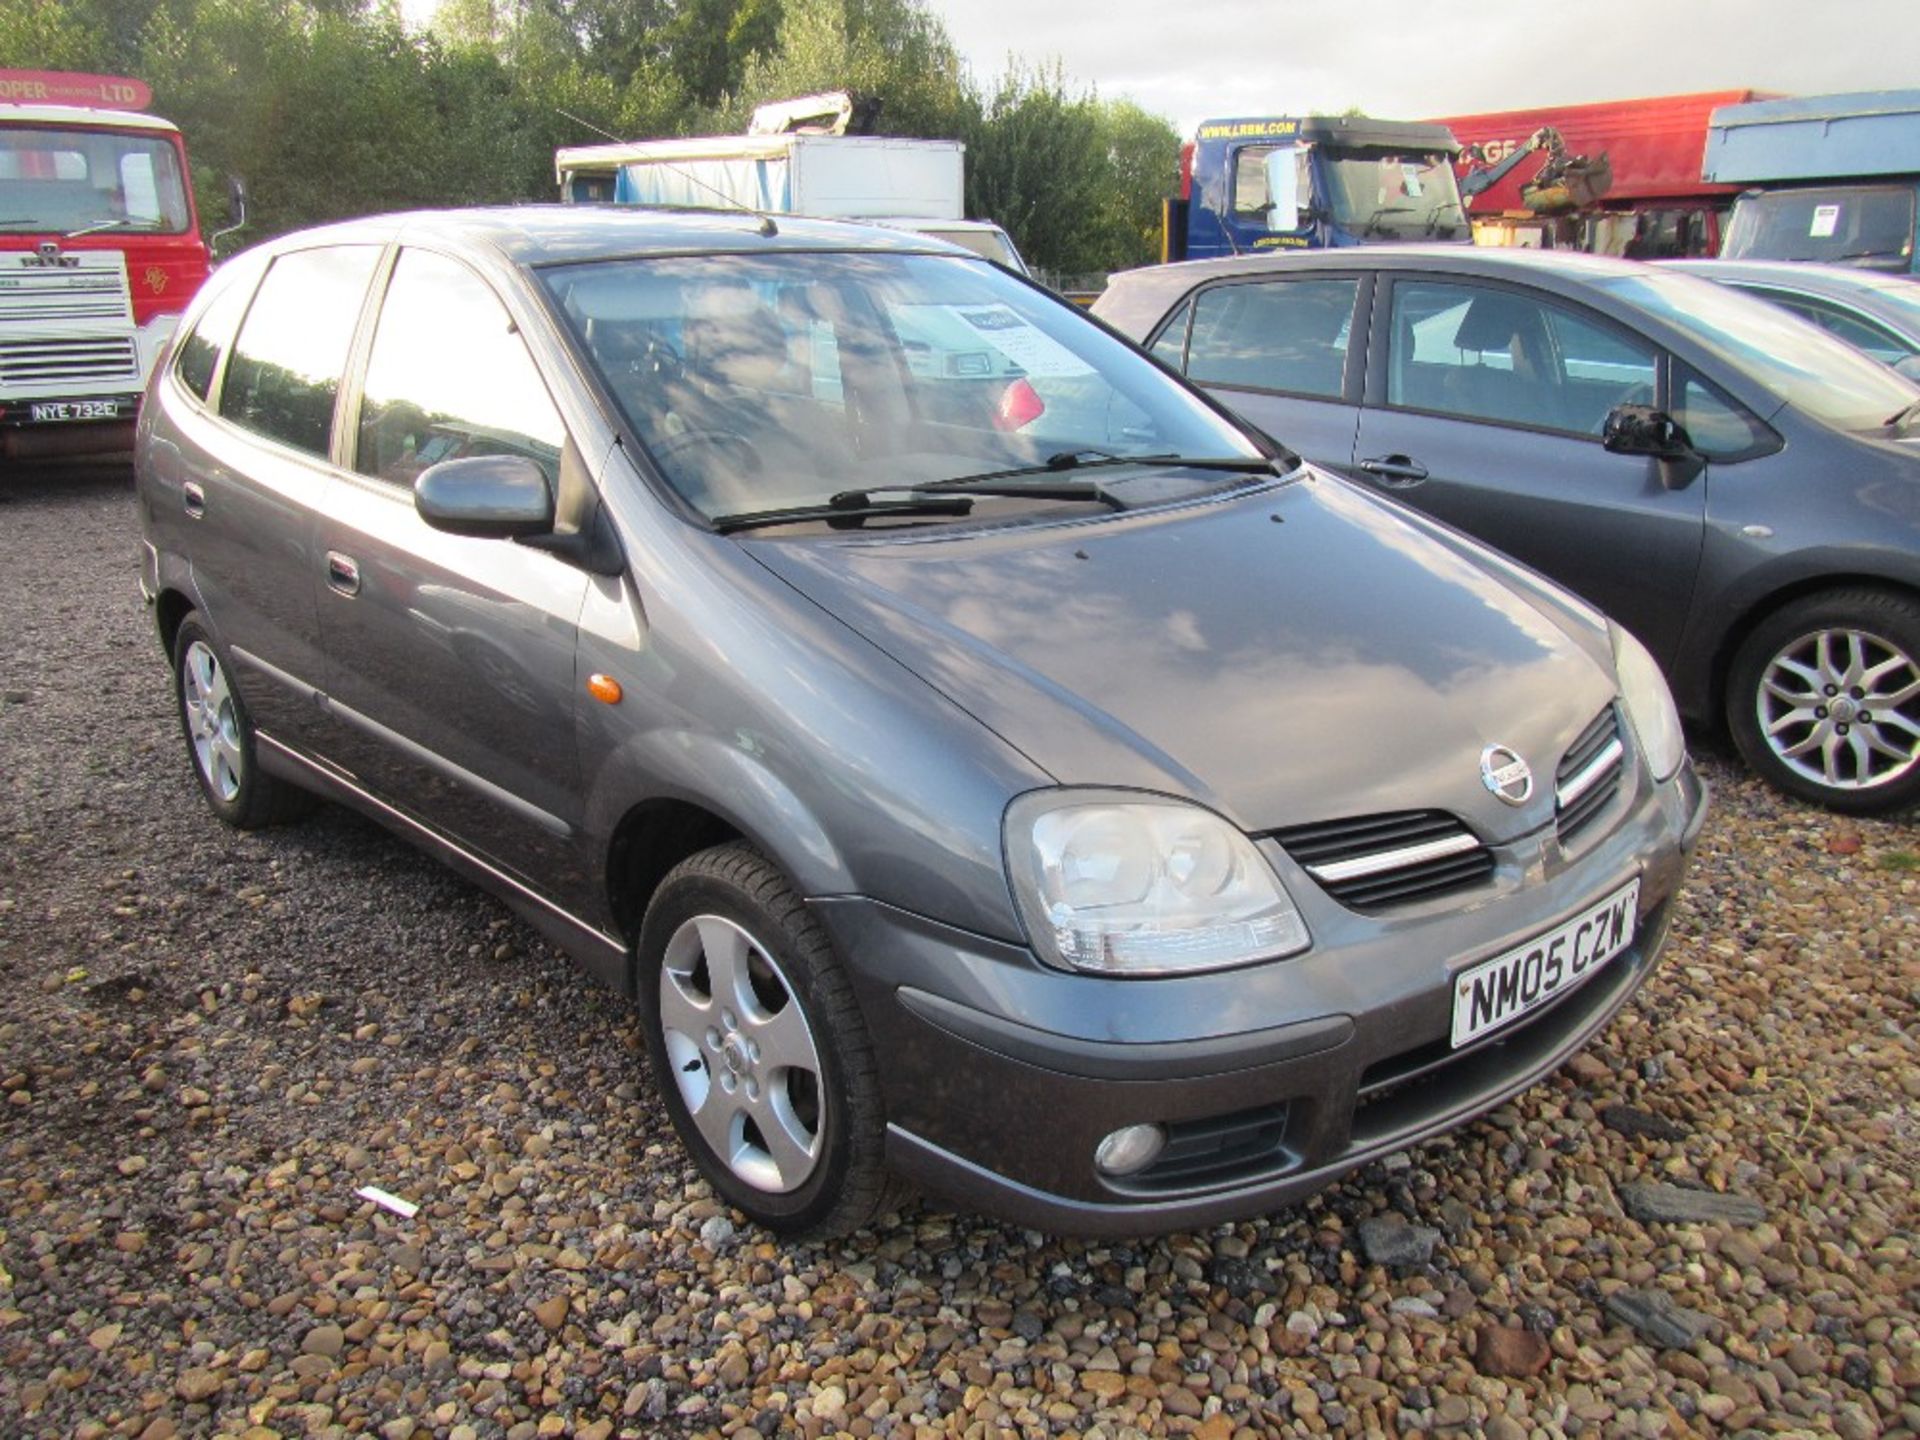 2005 Nissan Almera Tino - Spares & Repairs, Engine requires attention. Registration Documents will - Image 3 of 6